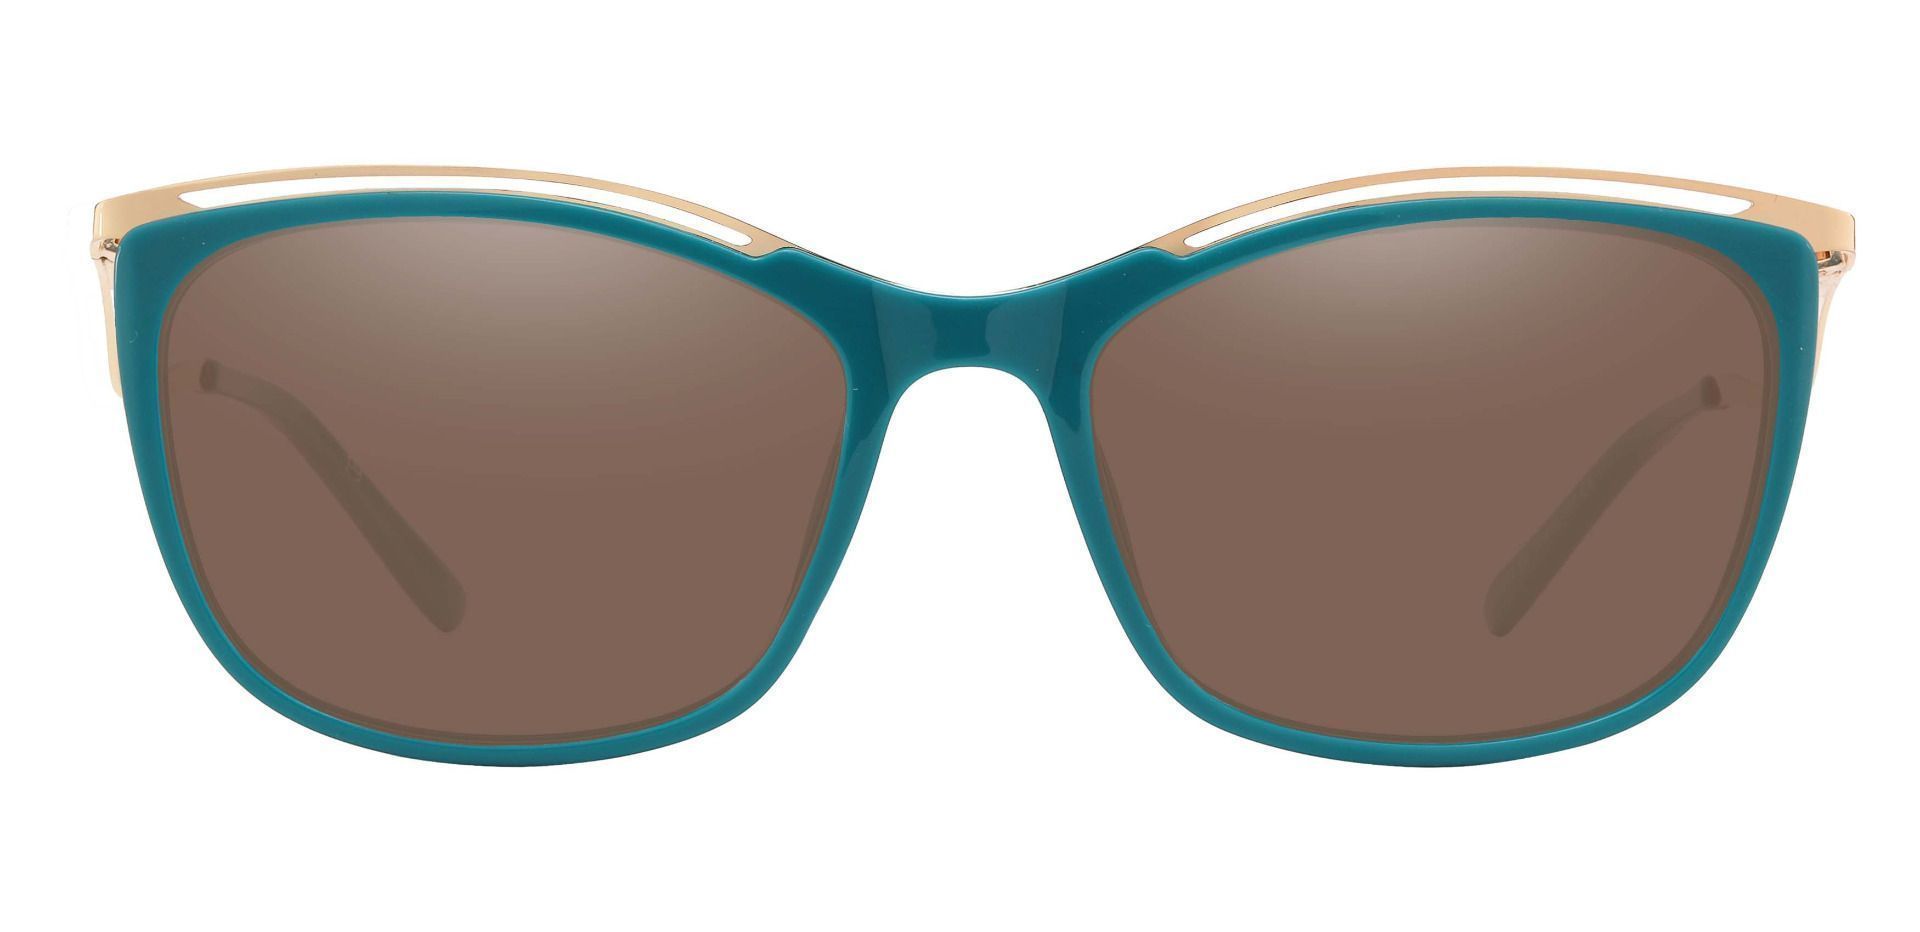 Enola Cat Eye Non-Rx Sunglasses - Green Frame With Brown Lenses